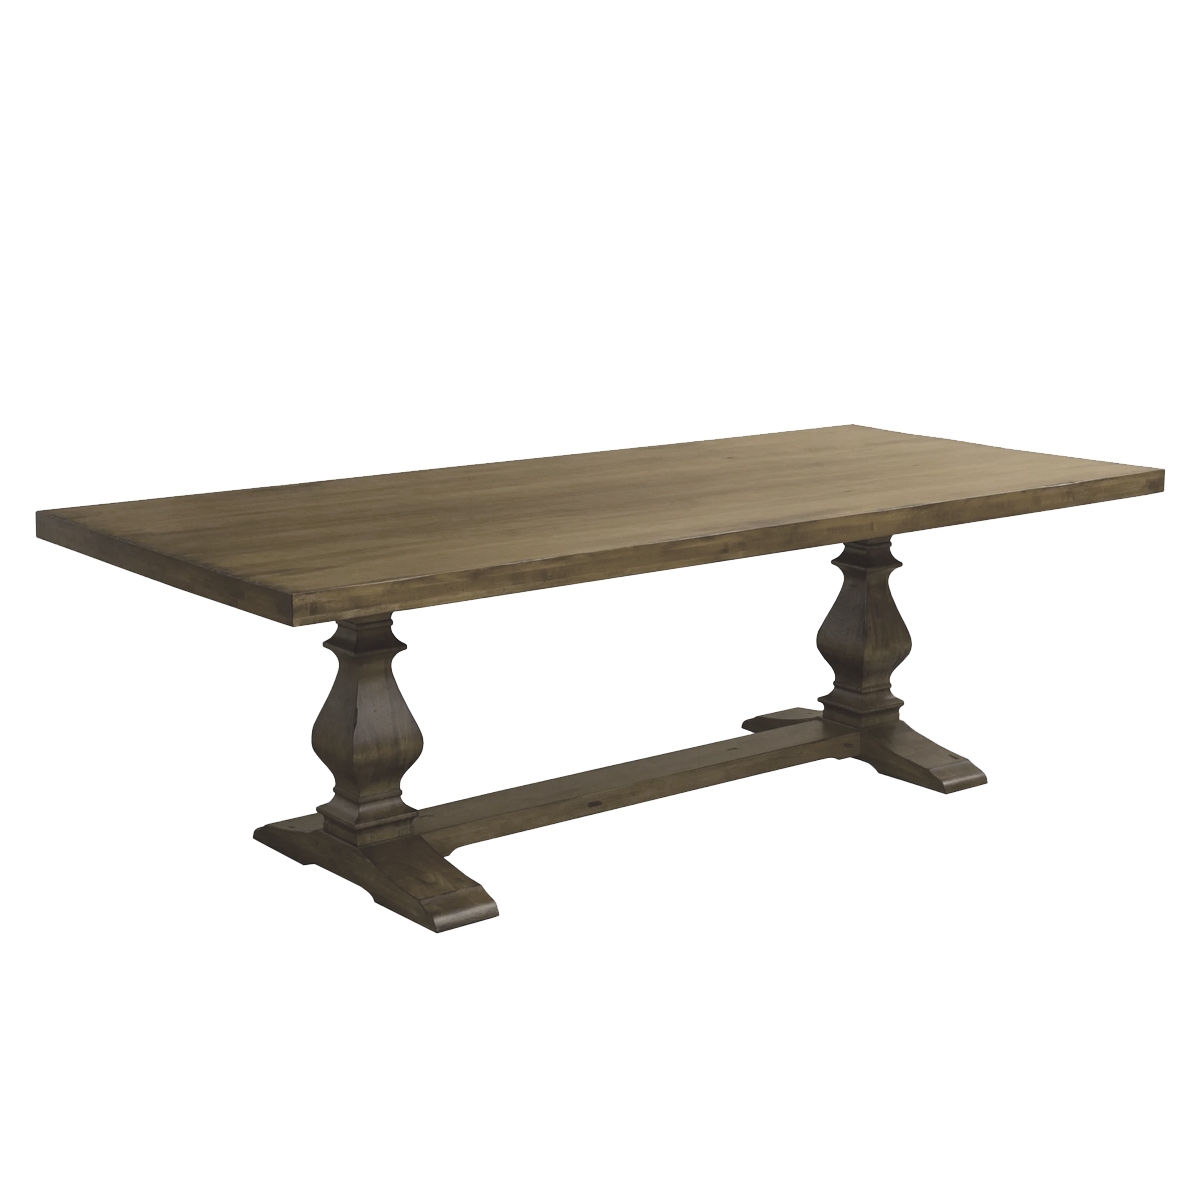 Ashford Maple Dining Table Color: Distressed Nantucket, Size: 29.75" H x 80" W x 42" D - Image 0